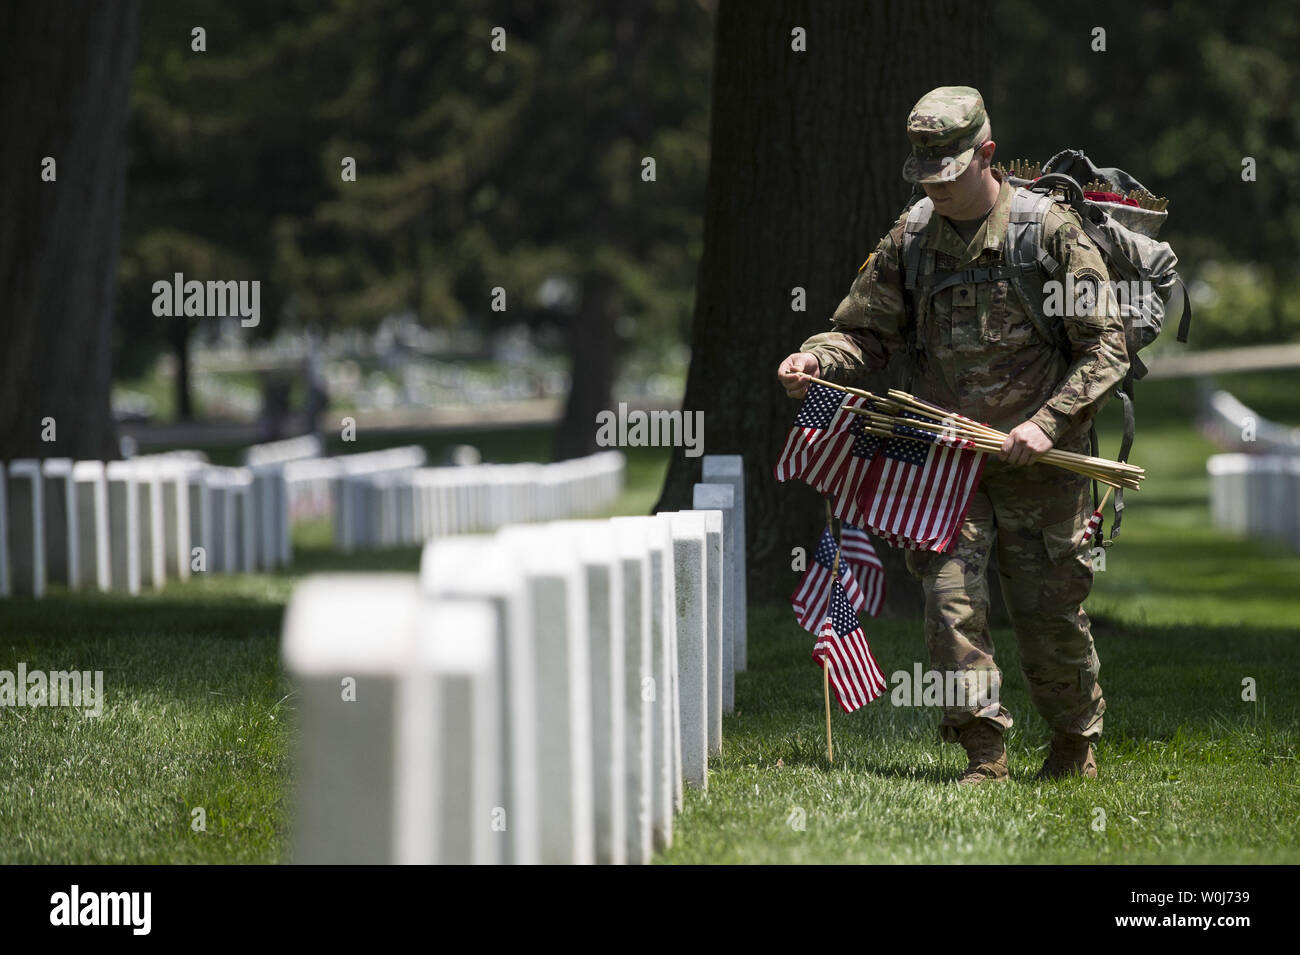 A soldier with the U.S. Army 3rd Infantry Regiment (Old Guard) places a flag at a grave marker as part of the annual Flags-In event for Memorial Day at Arlington National Cemetery in Arlington, Virginia on May 26, 2016. Members of The Old Guard placed an America flag at more than 230,000 grave markers at Arlington in honor of of Nation's fallen military members. The tradition has been conducted since 1948. Photo by Kevin Dietsch/UPI Stock Photo